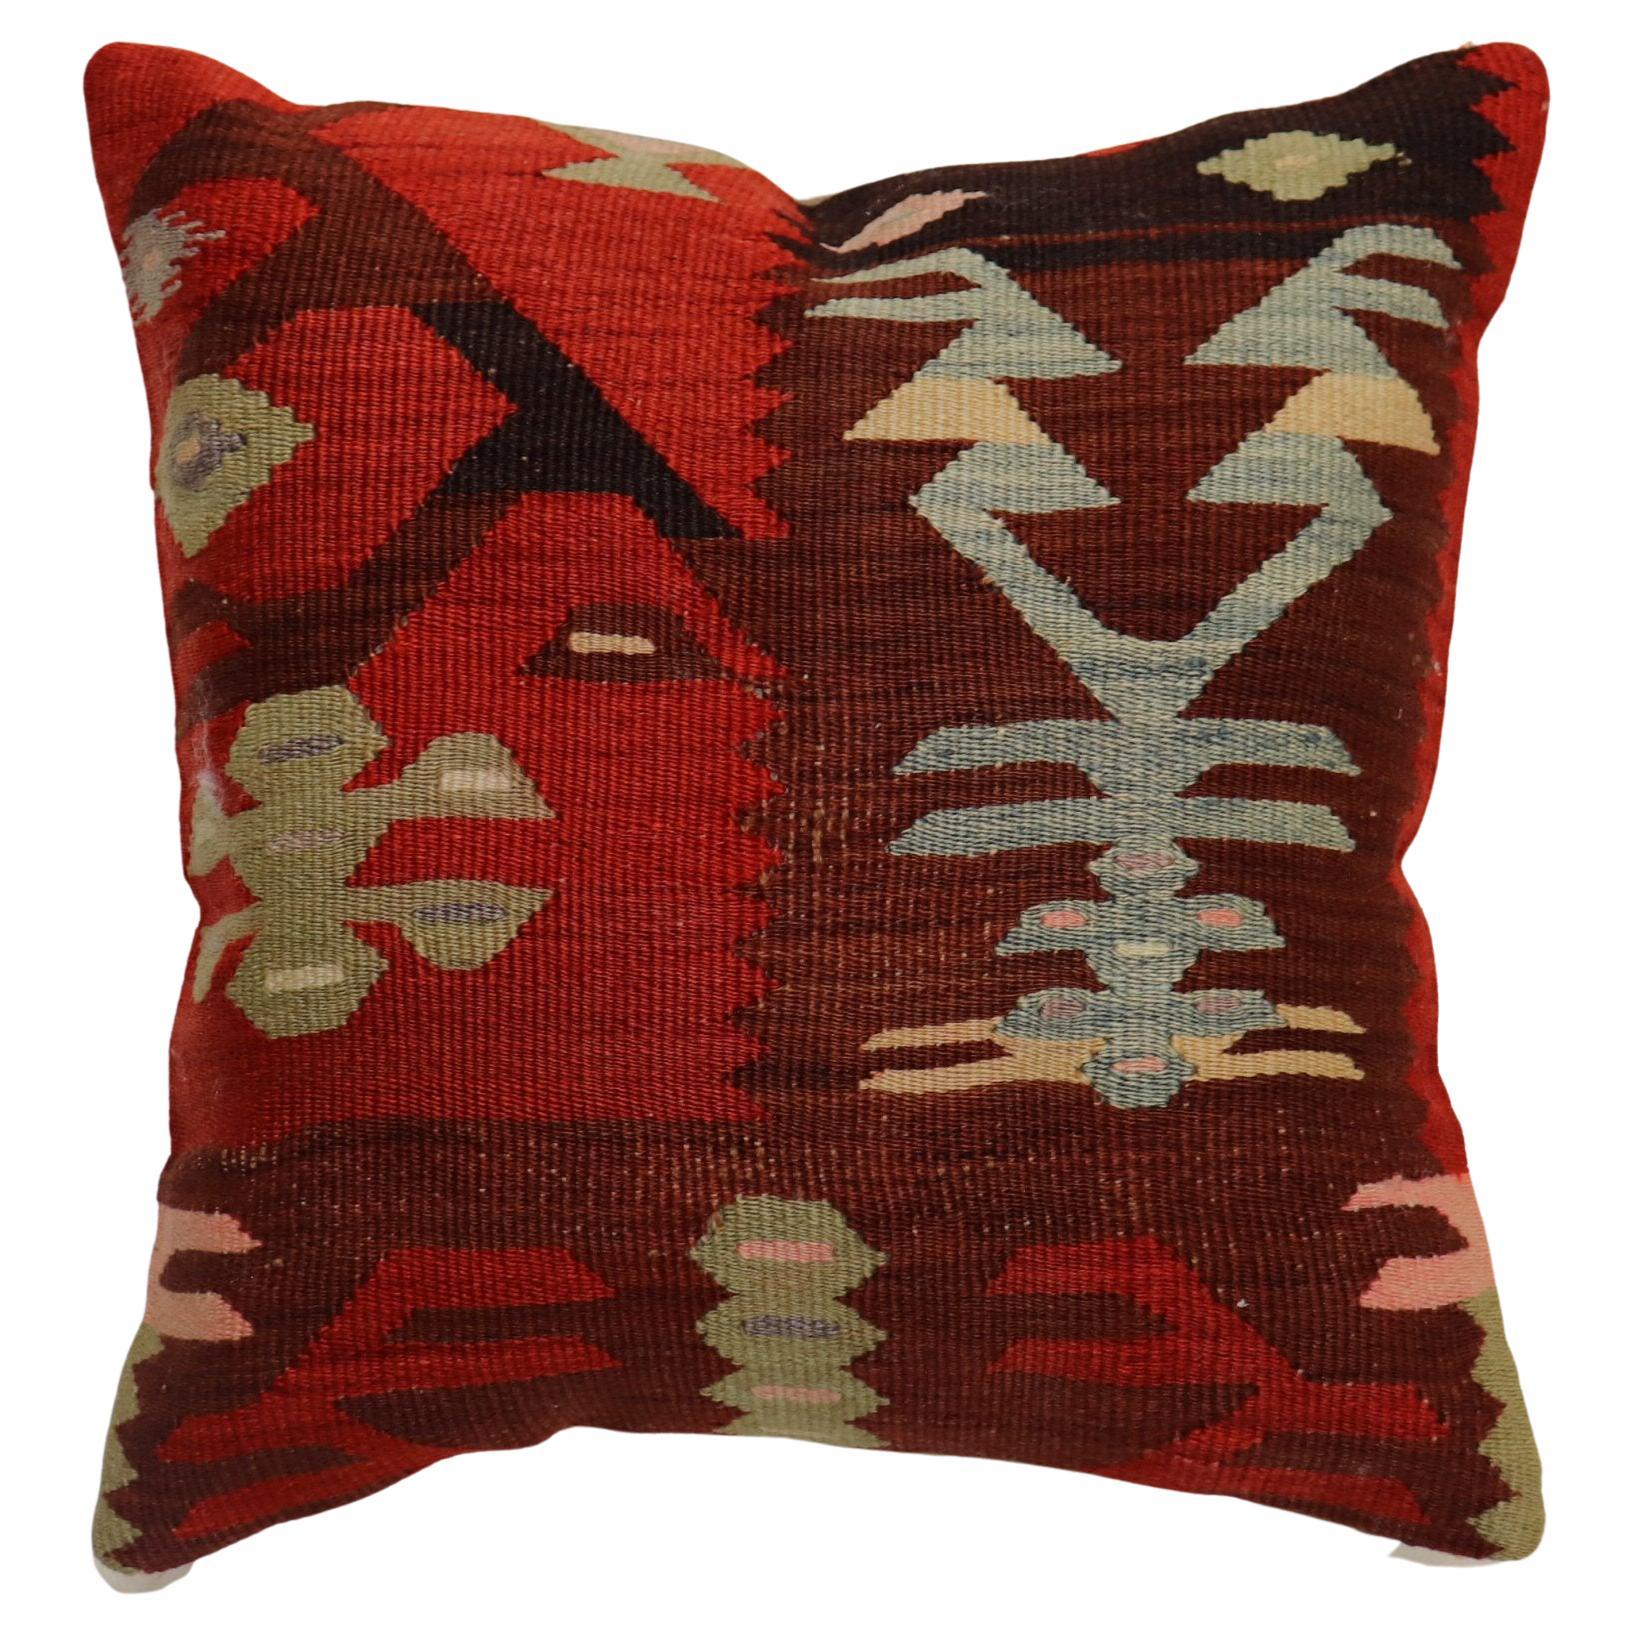 Rustic Red Brown Geometric Turkish Kilim Pillow For Sale